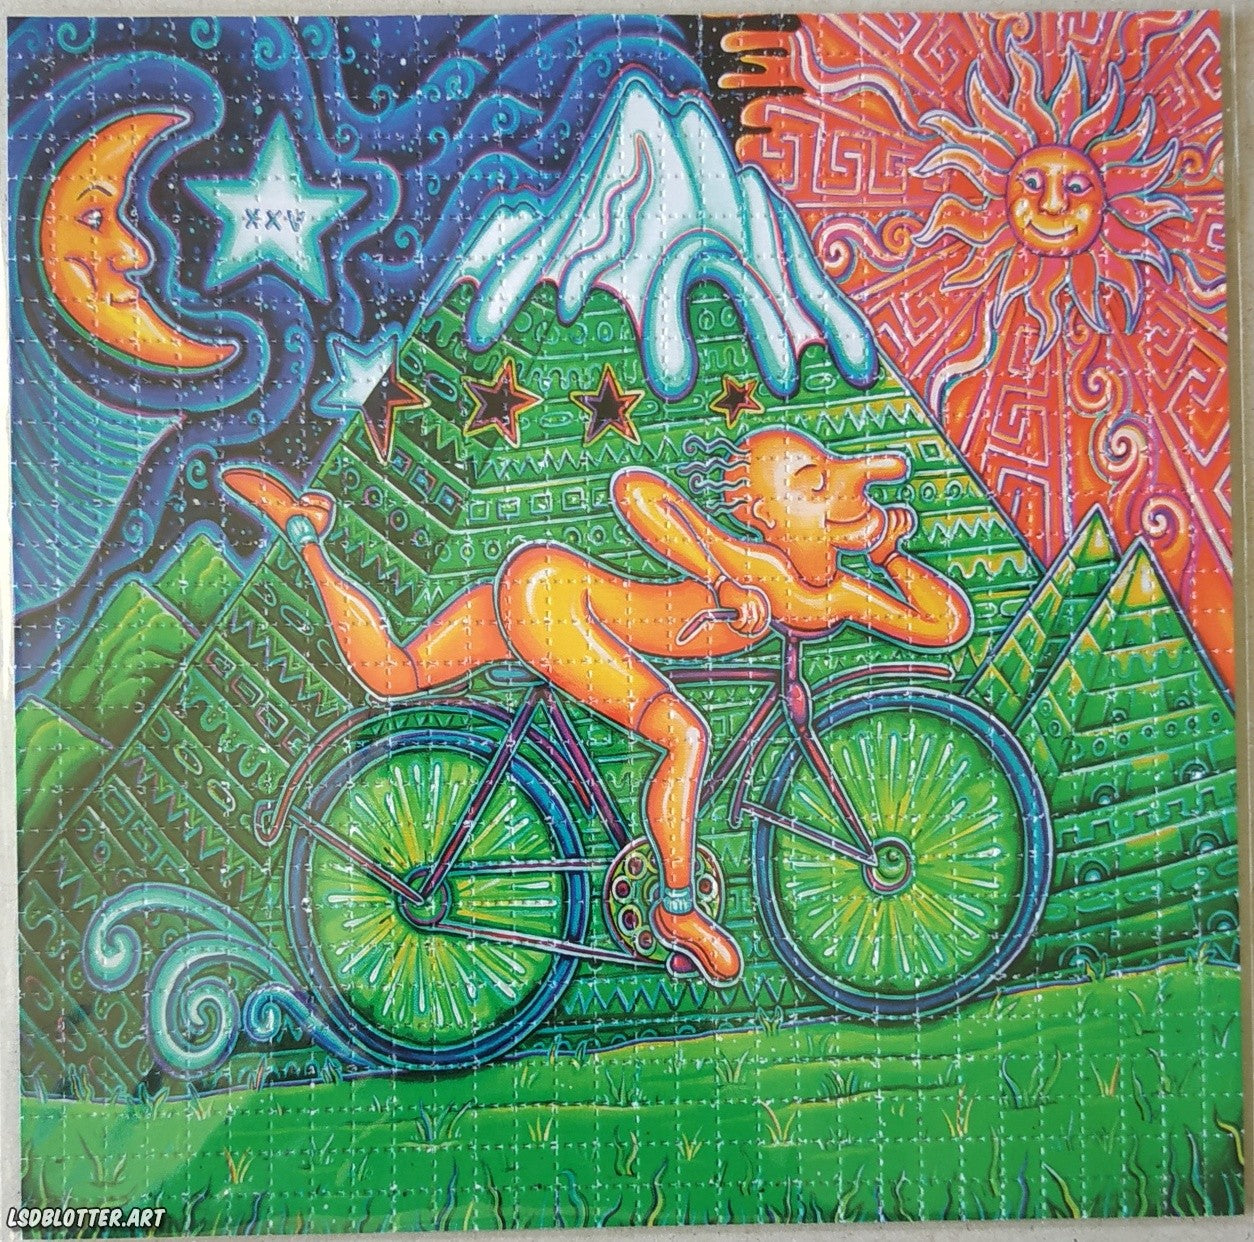 Bicycle Day by John Speaker Limited Edition LSD blotter art print